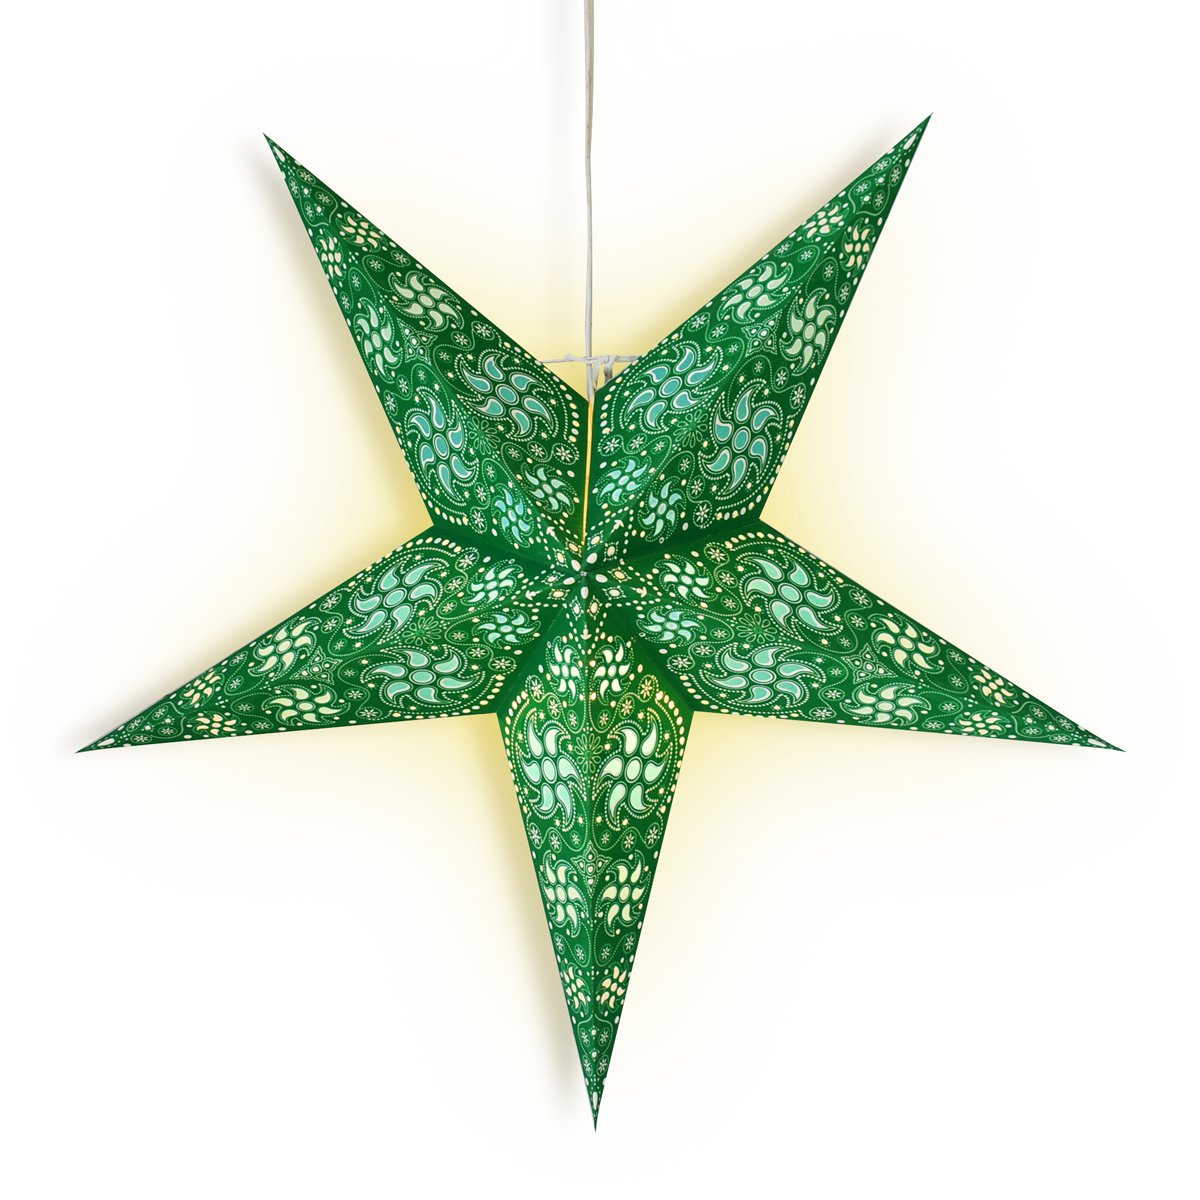 24" Green Winds Paper Star Lantern, Hanging Wedding & Party Decoration - AsianImportStore.com - B2B Wholesale Lighting and Decor